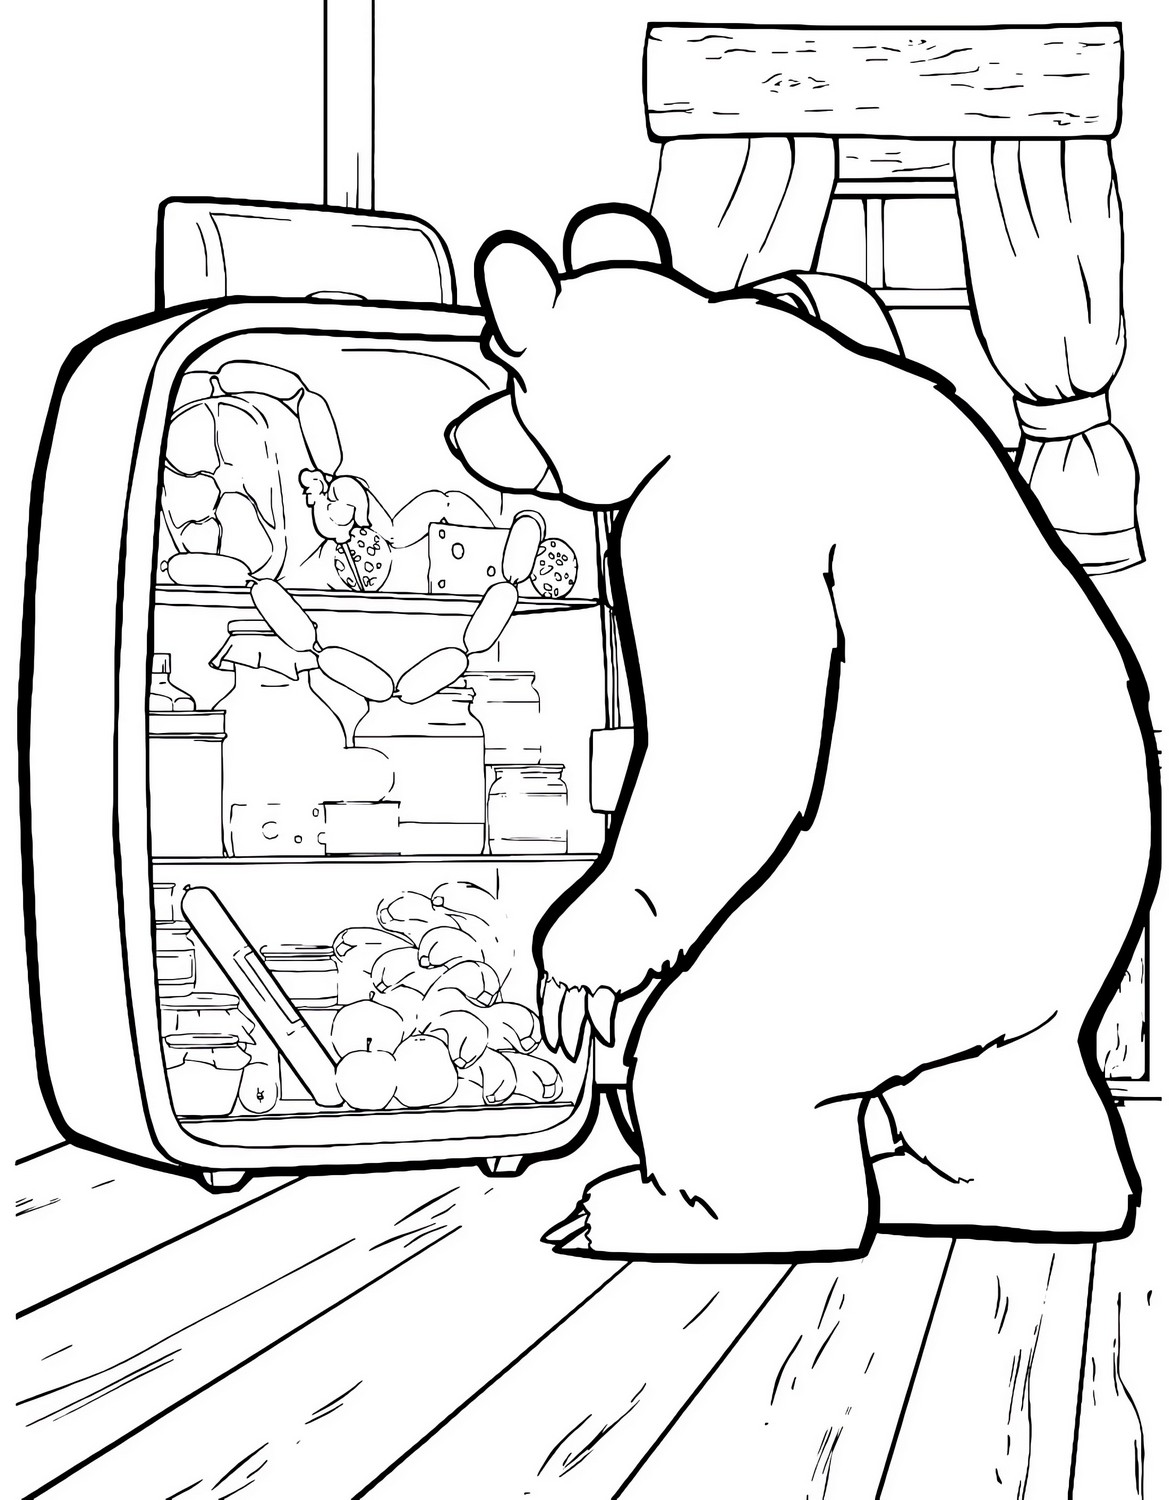 Drawing 04 of Masha and the Bear to print and color